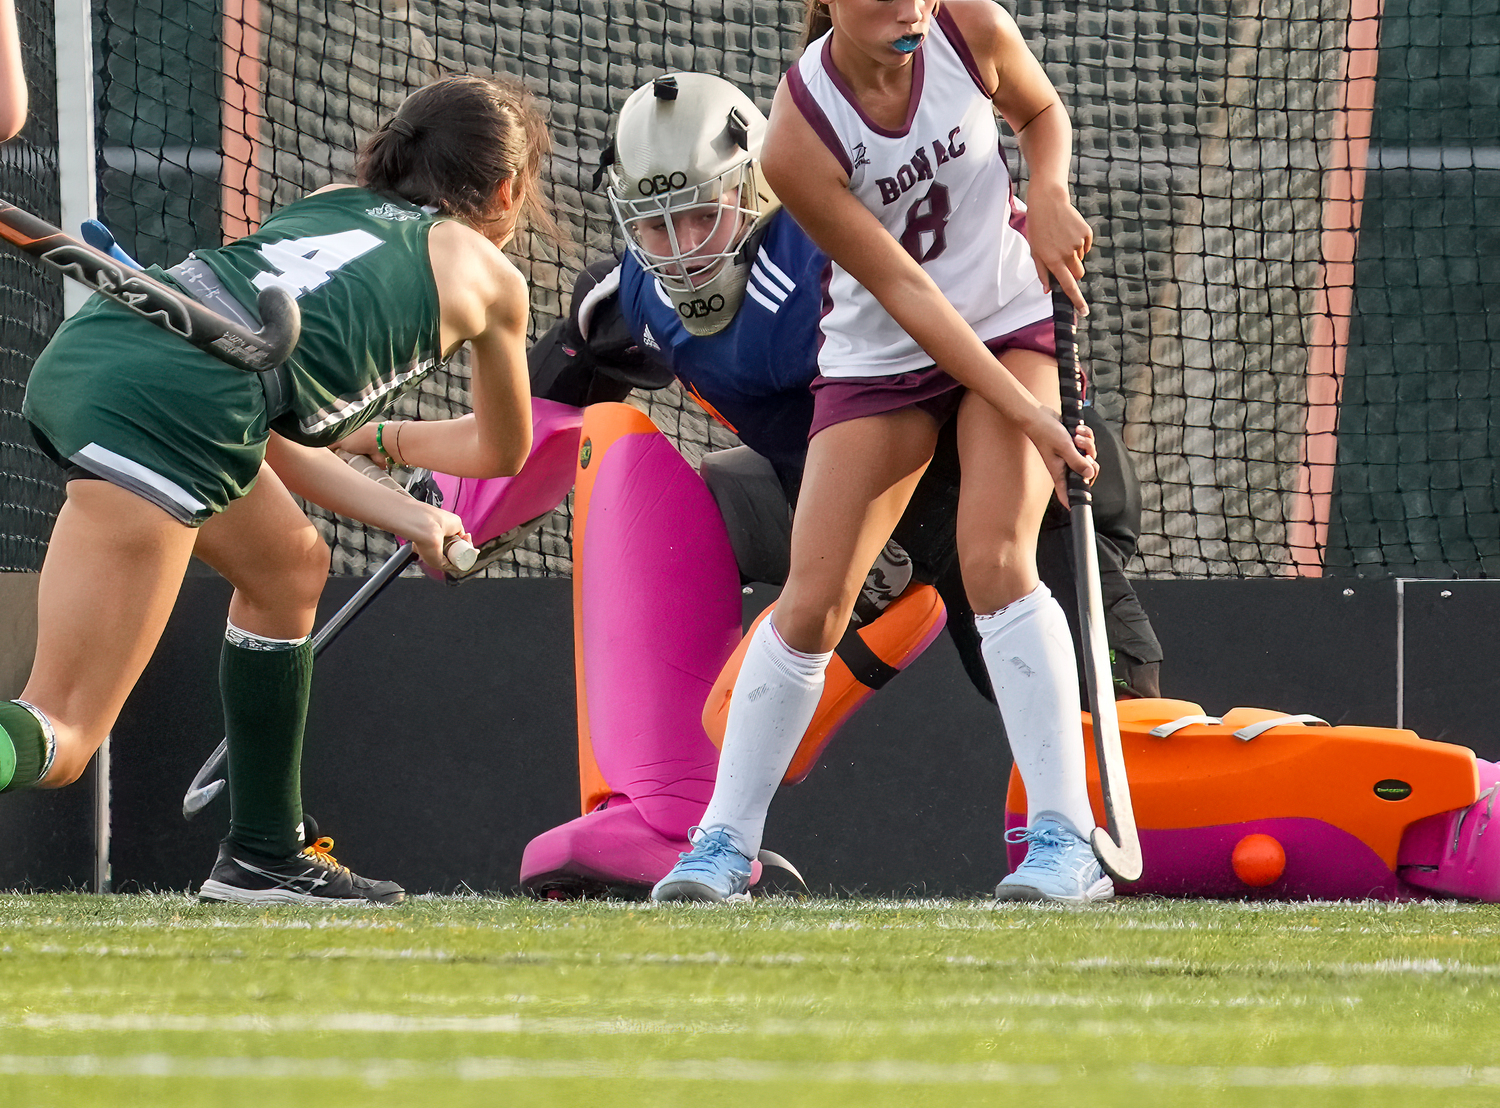 East Hampton goalie Caeleigh Schuster came up with some big saves in her team's shootout win over Harborfields. RON ESPOSITO